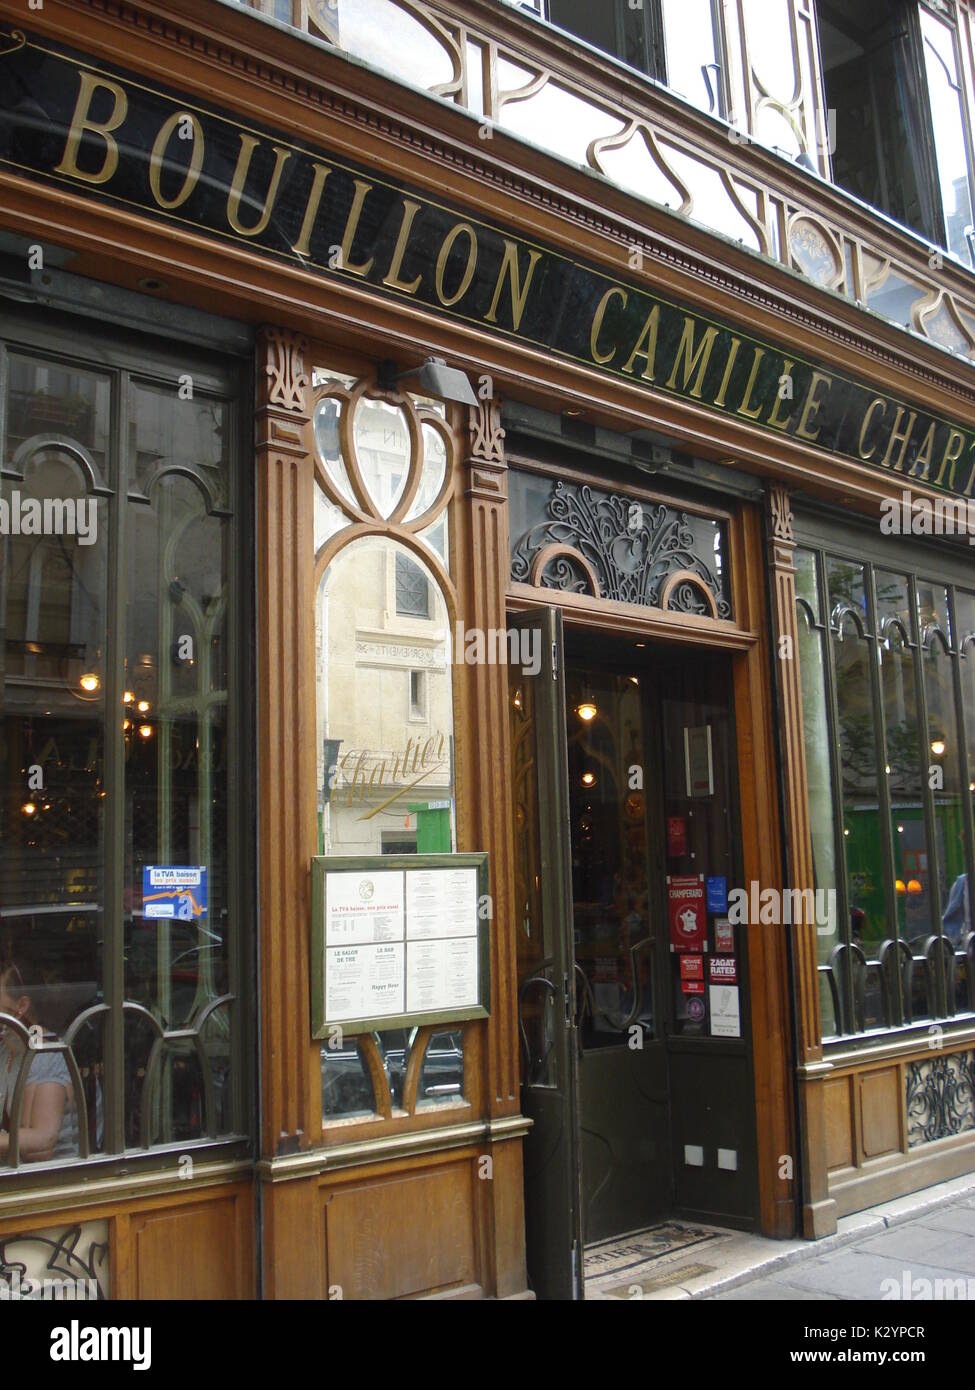 Symon Petlioura, Ukranian leader in exile in Paris used to eat in this restaurant, Bouillon, and took his last meal here just before he was killed Stock Photo